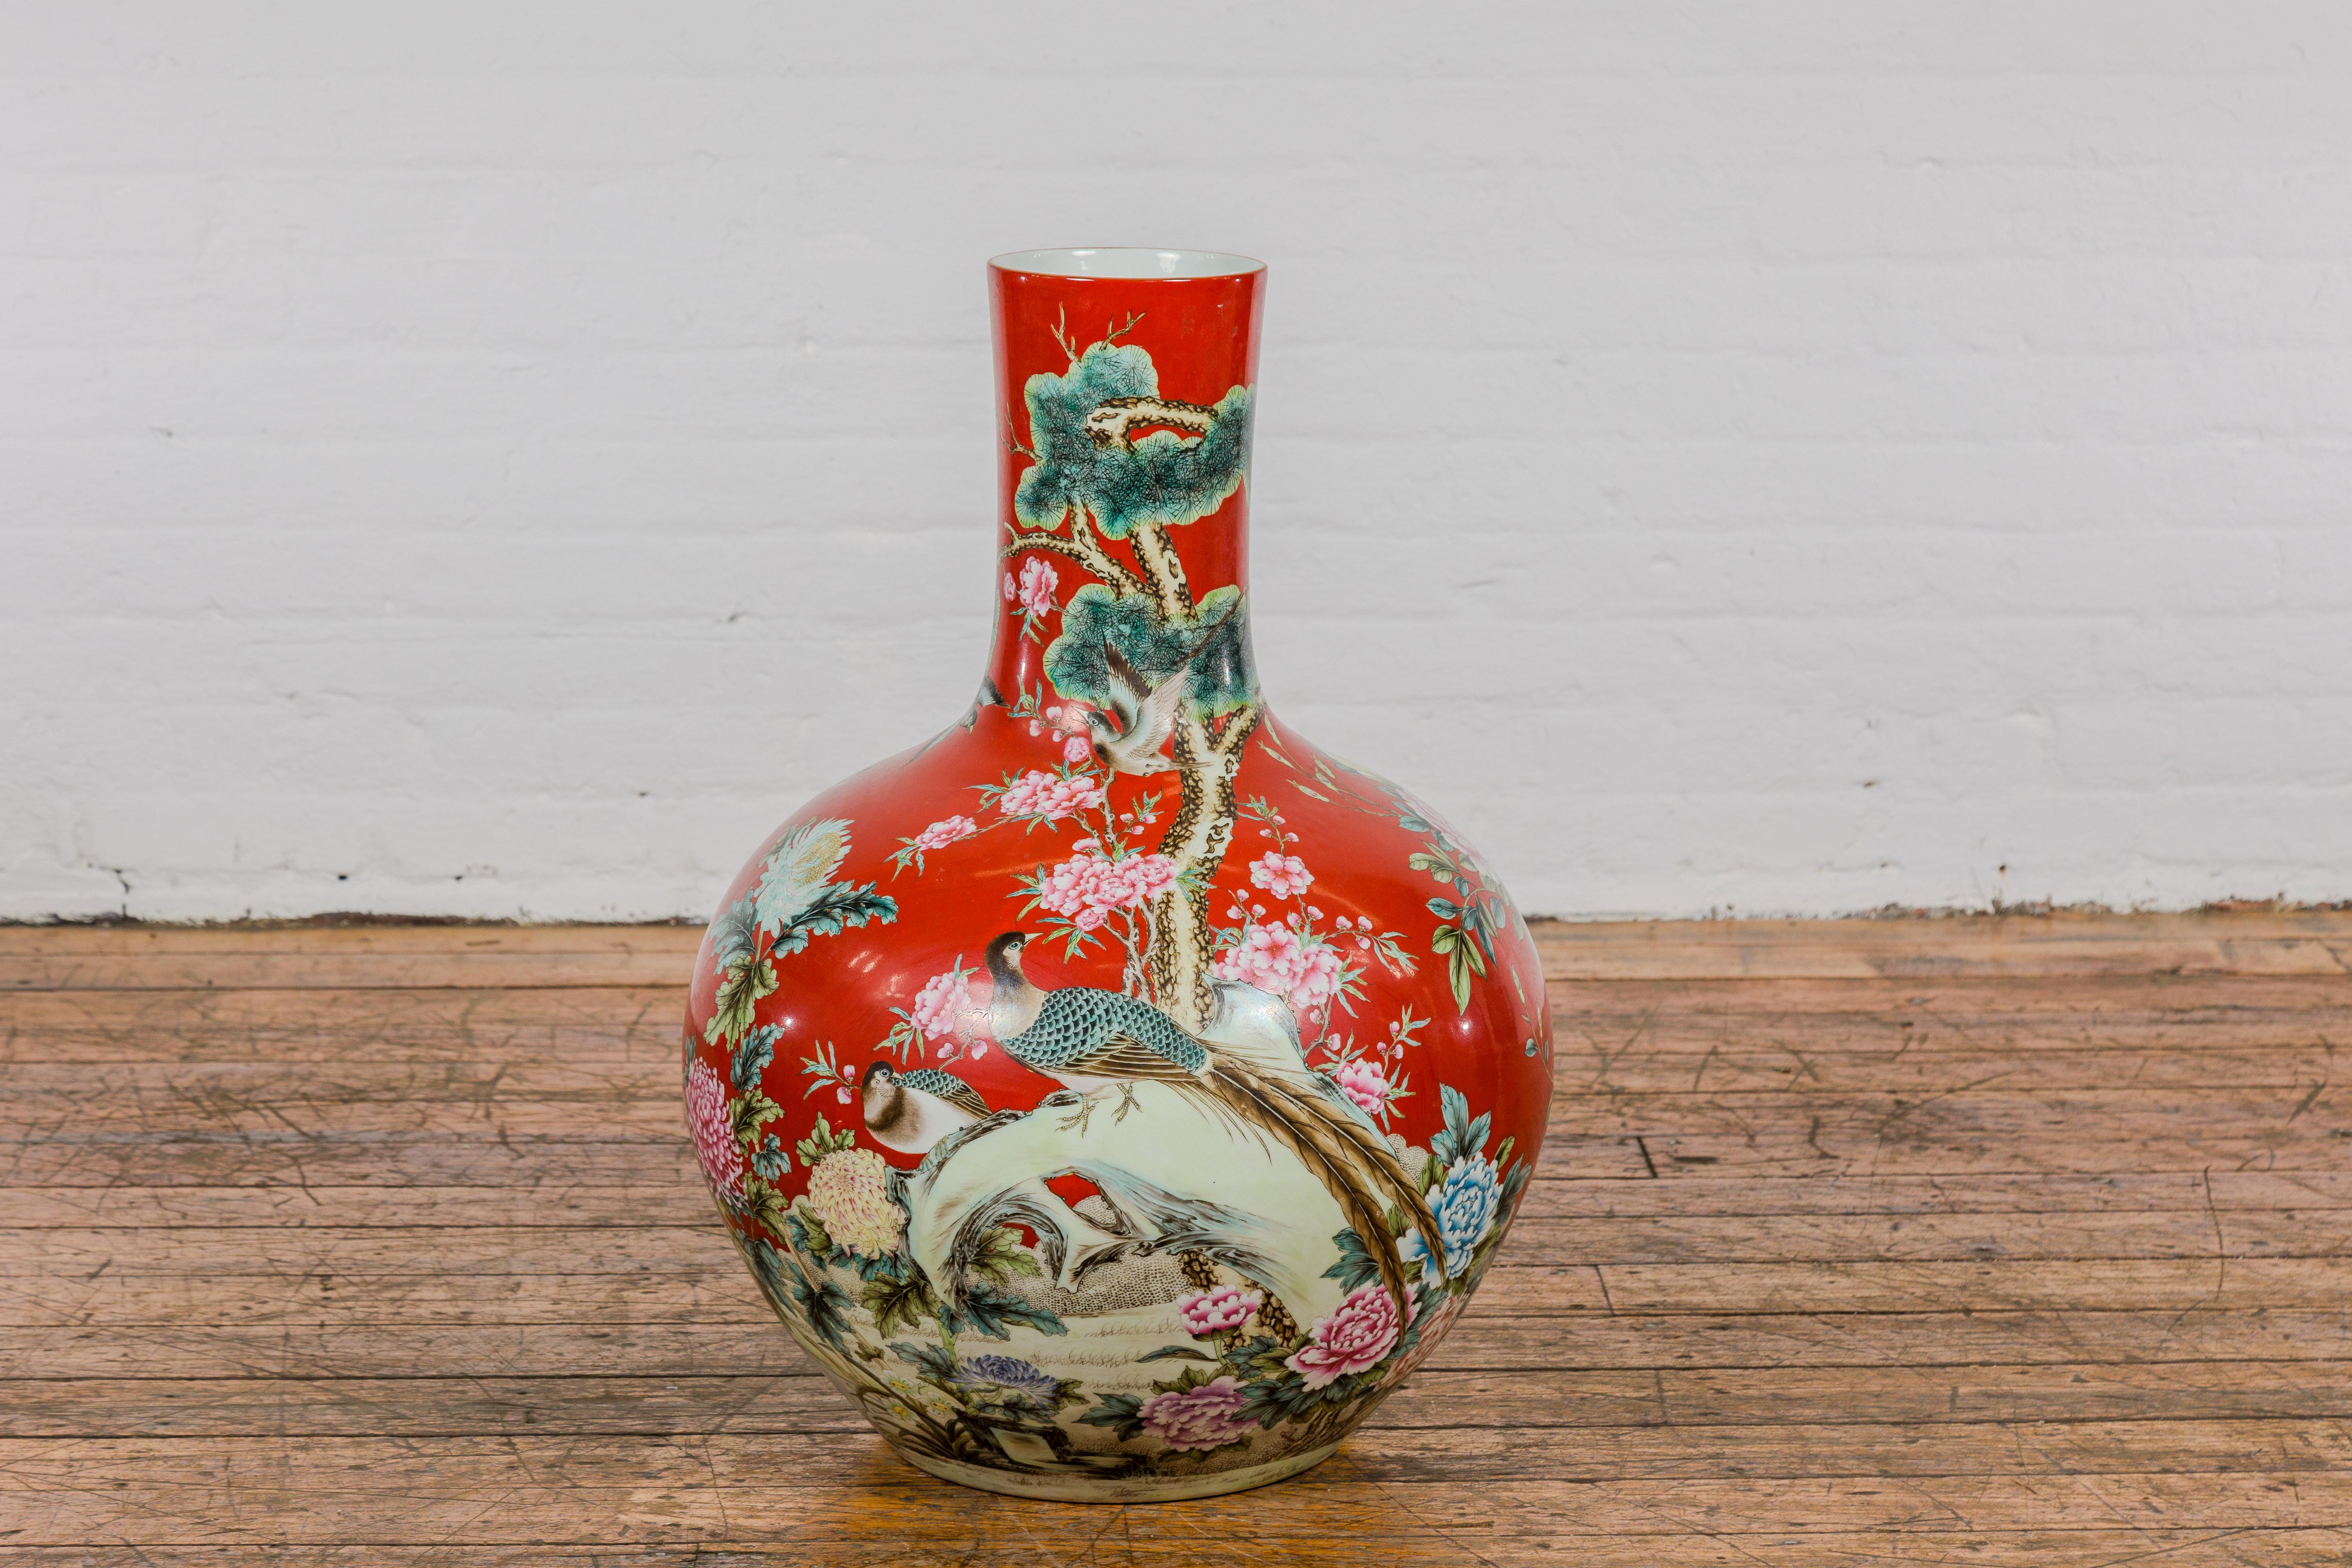 A Kendi style red porcelain vase hand painted with bird and floral patterns from mid century China. Discover the beauty of the Orient with this captivating Kendi-style red porcelain vase, meticulously hand-painted with delicate bird and floral